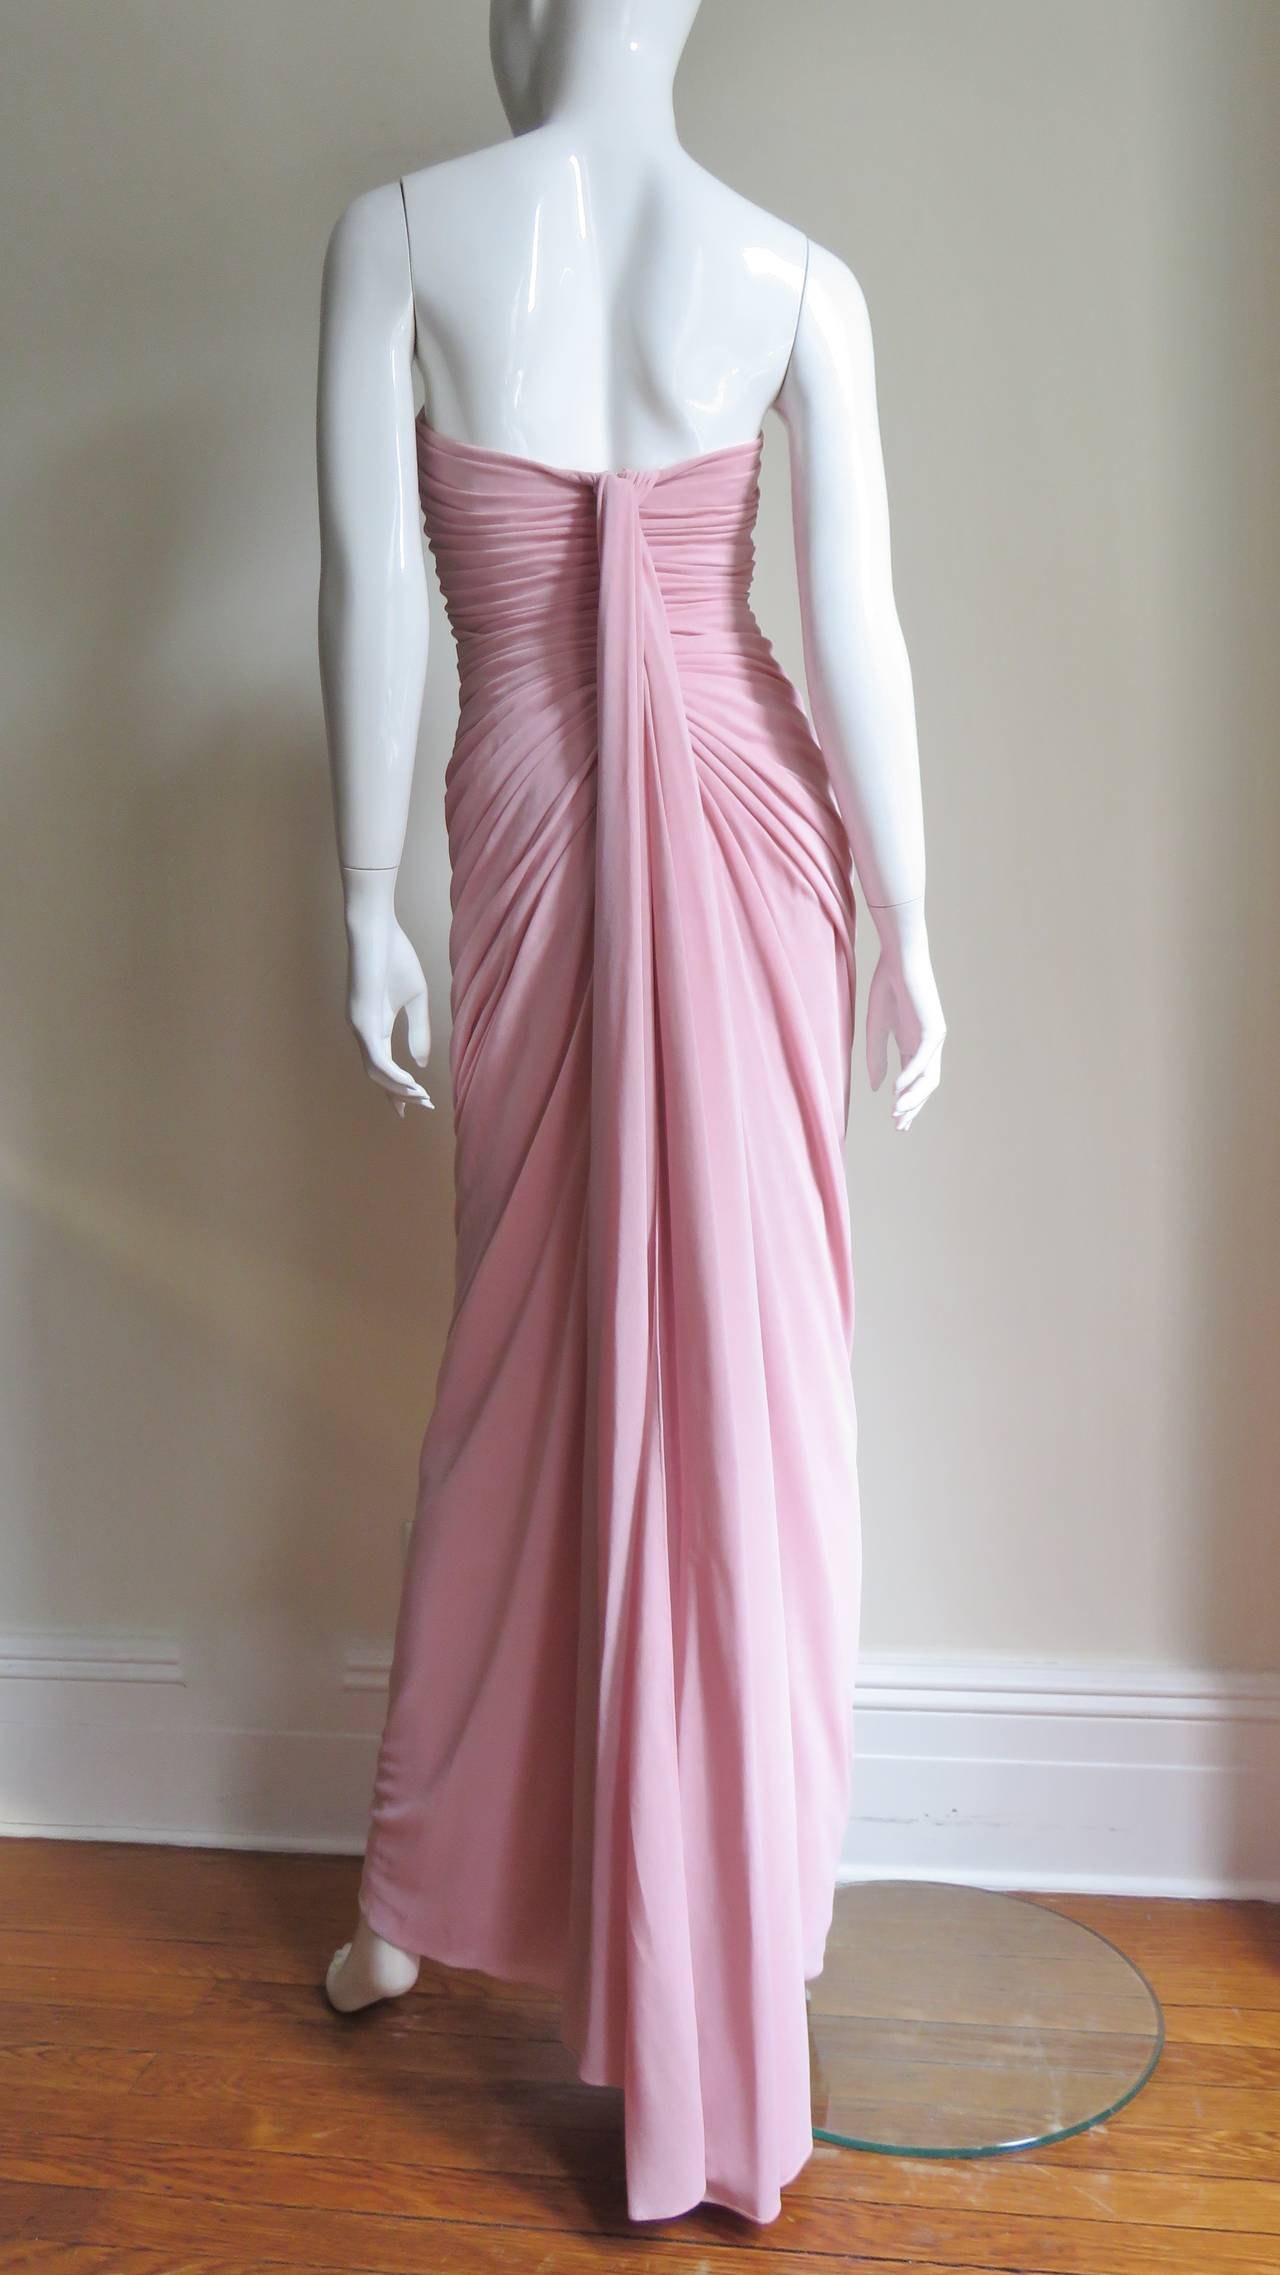 Incredible 1970's Estevez Ruched Gown For Sale at 1stdibs